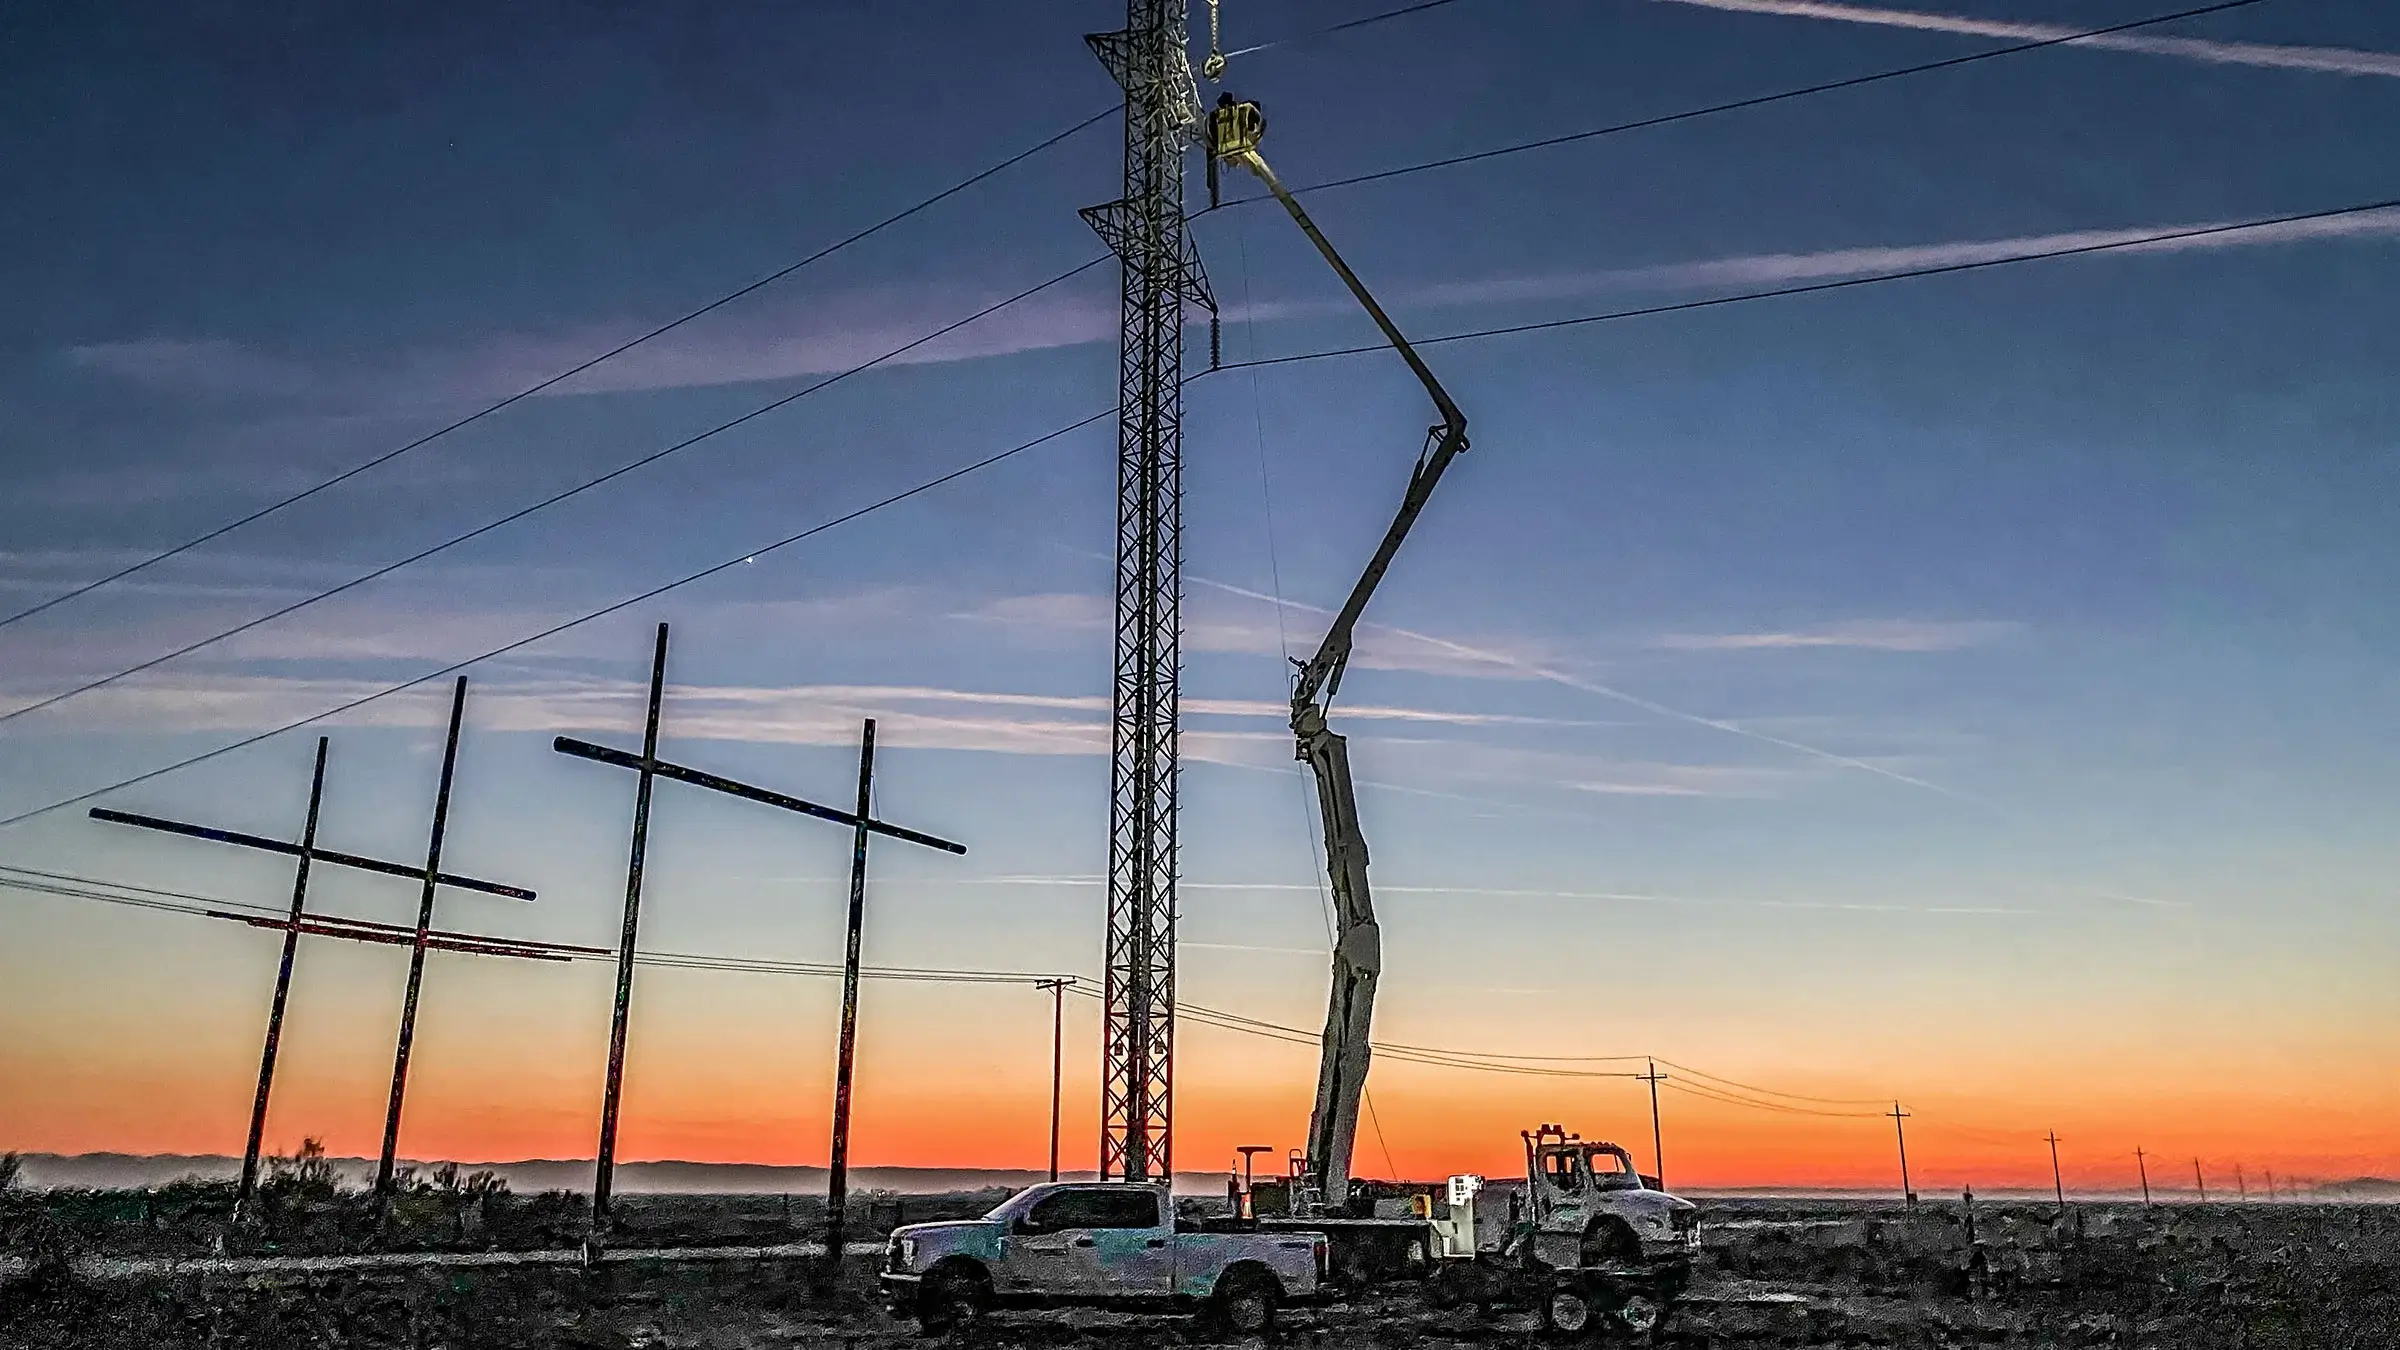 A bucket truck operates at dusk near a power structure